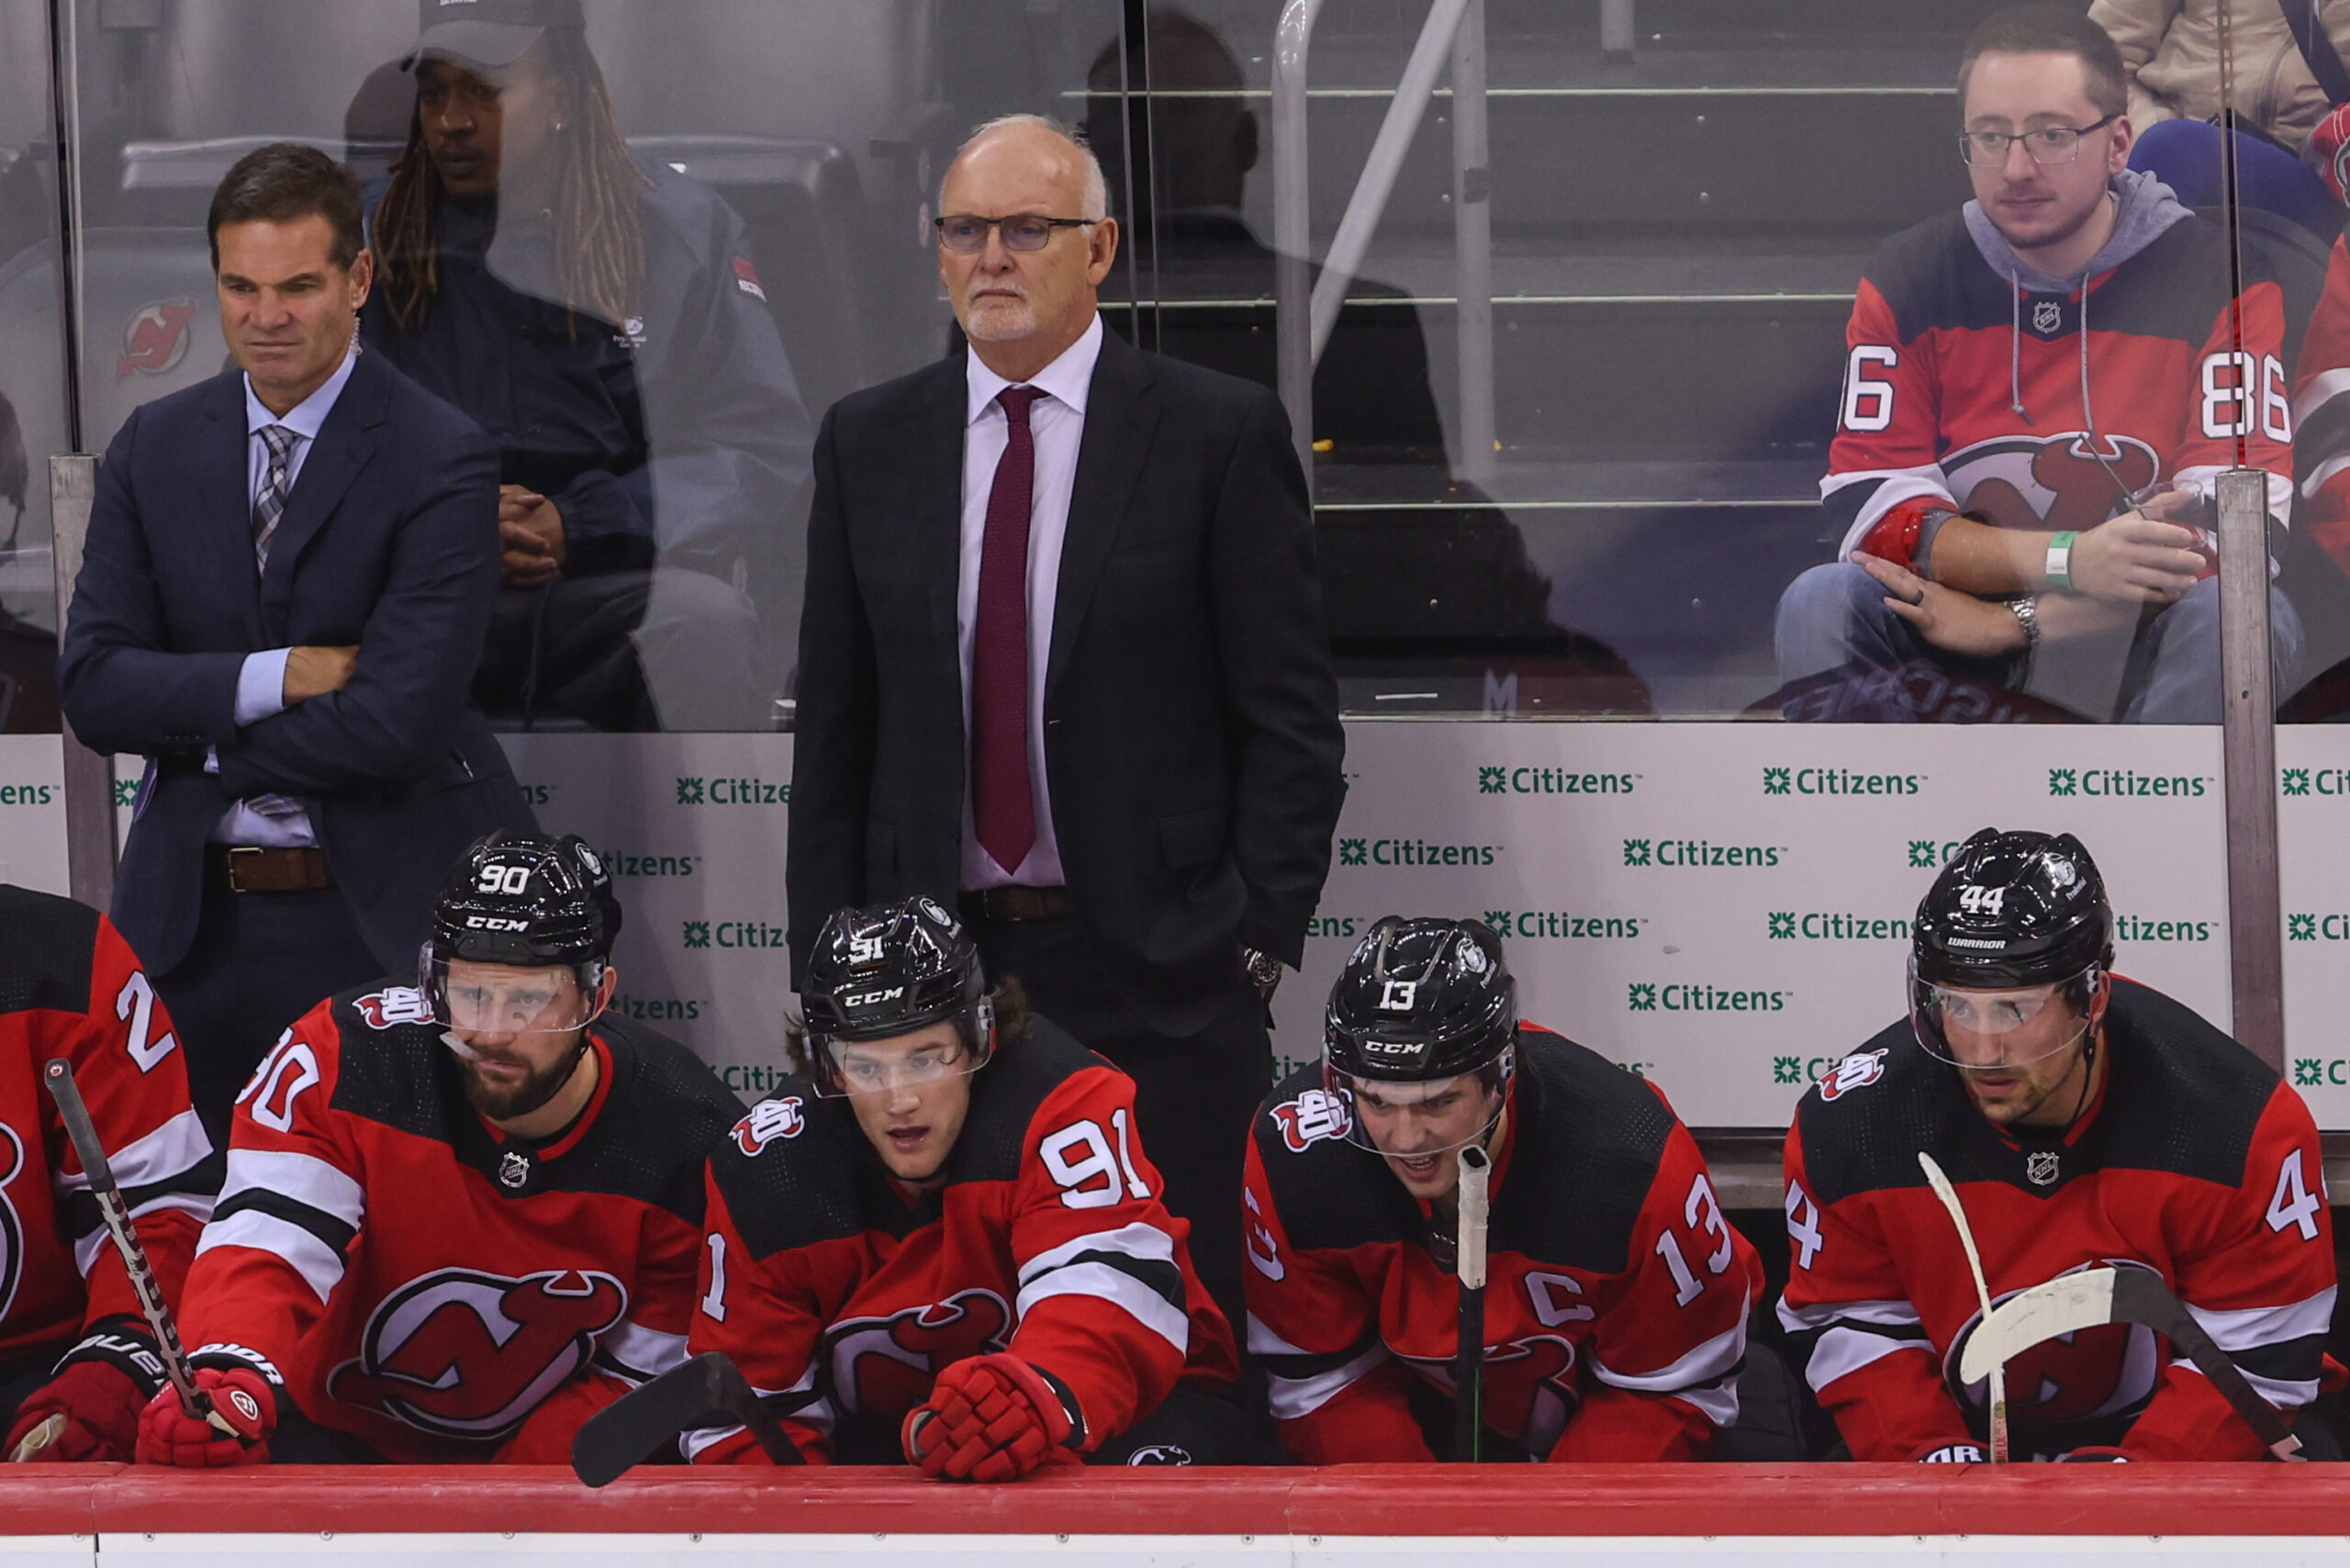 Devils coach Lindy Ruff tests positive, misses Oilers game